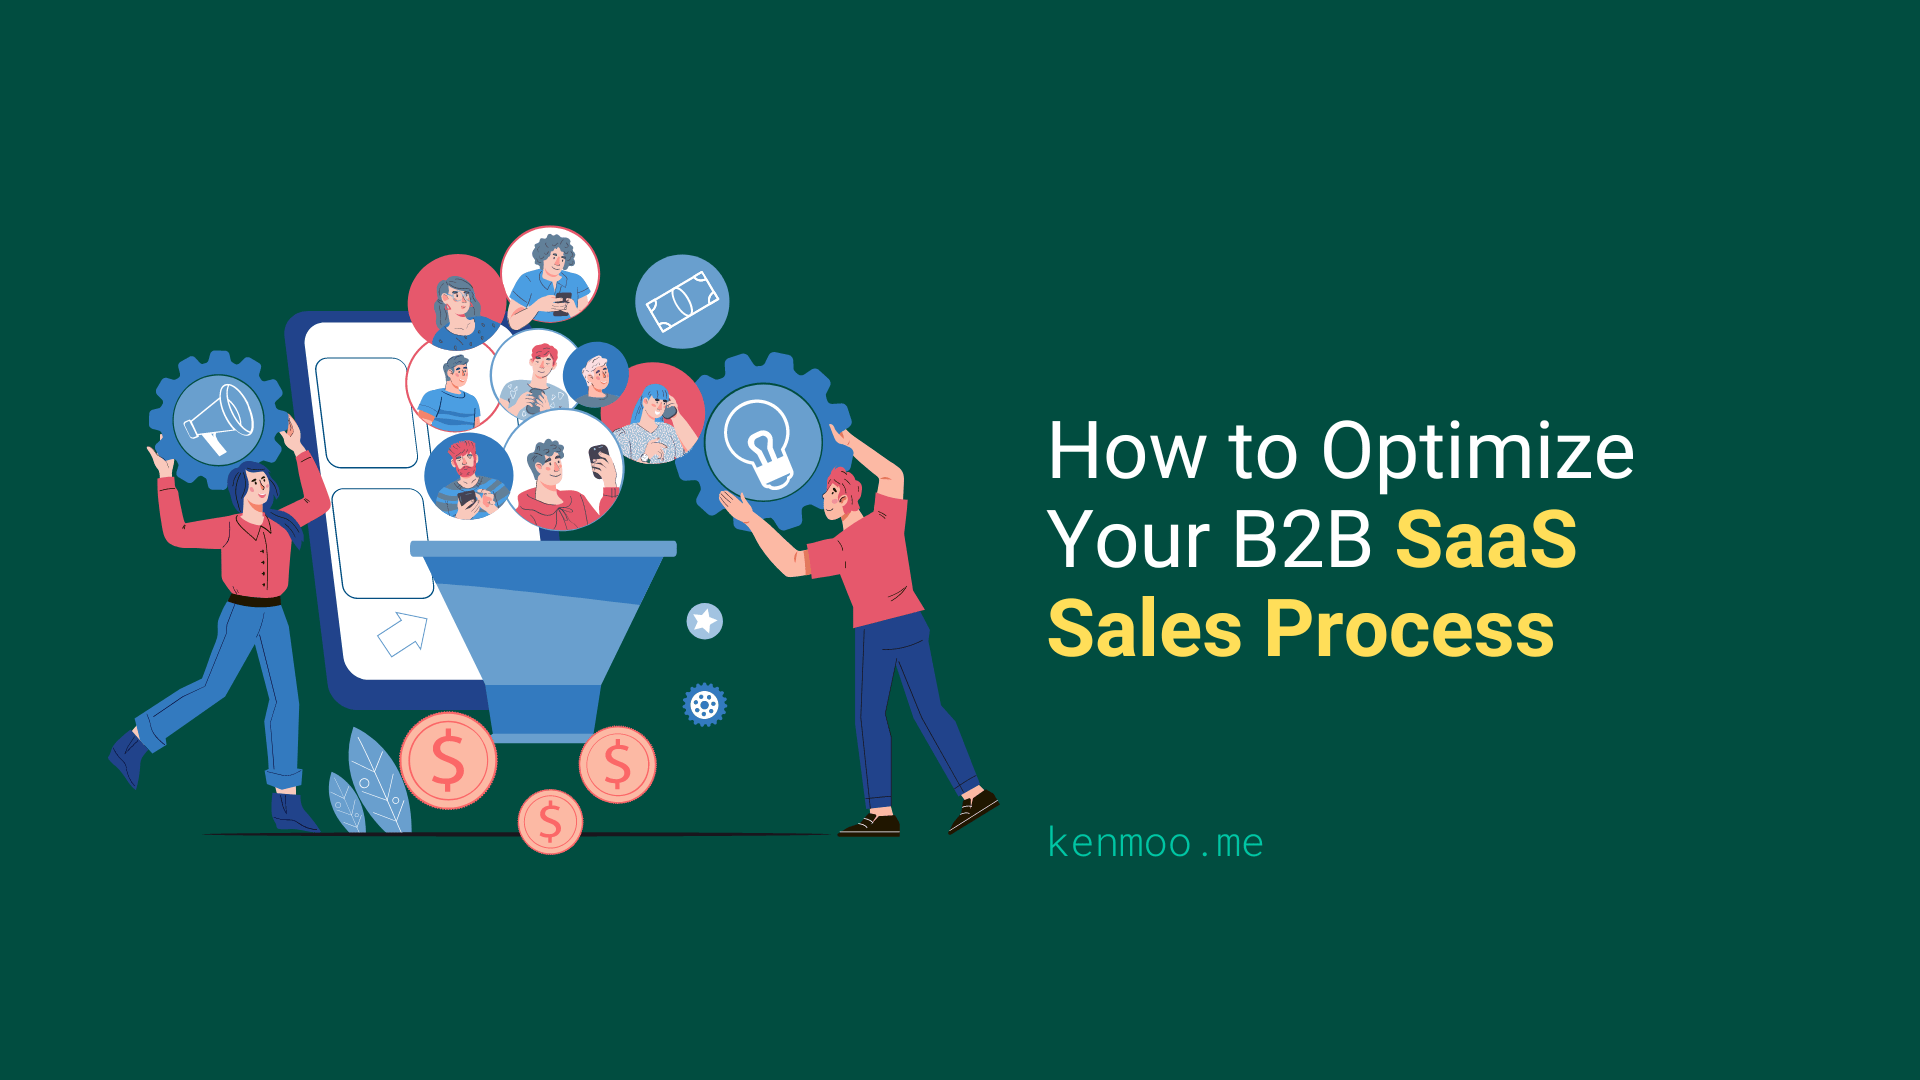 How to Optimize Your B2B SaaS Sales Process